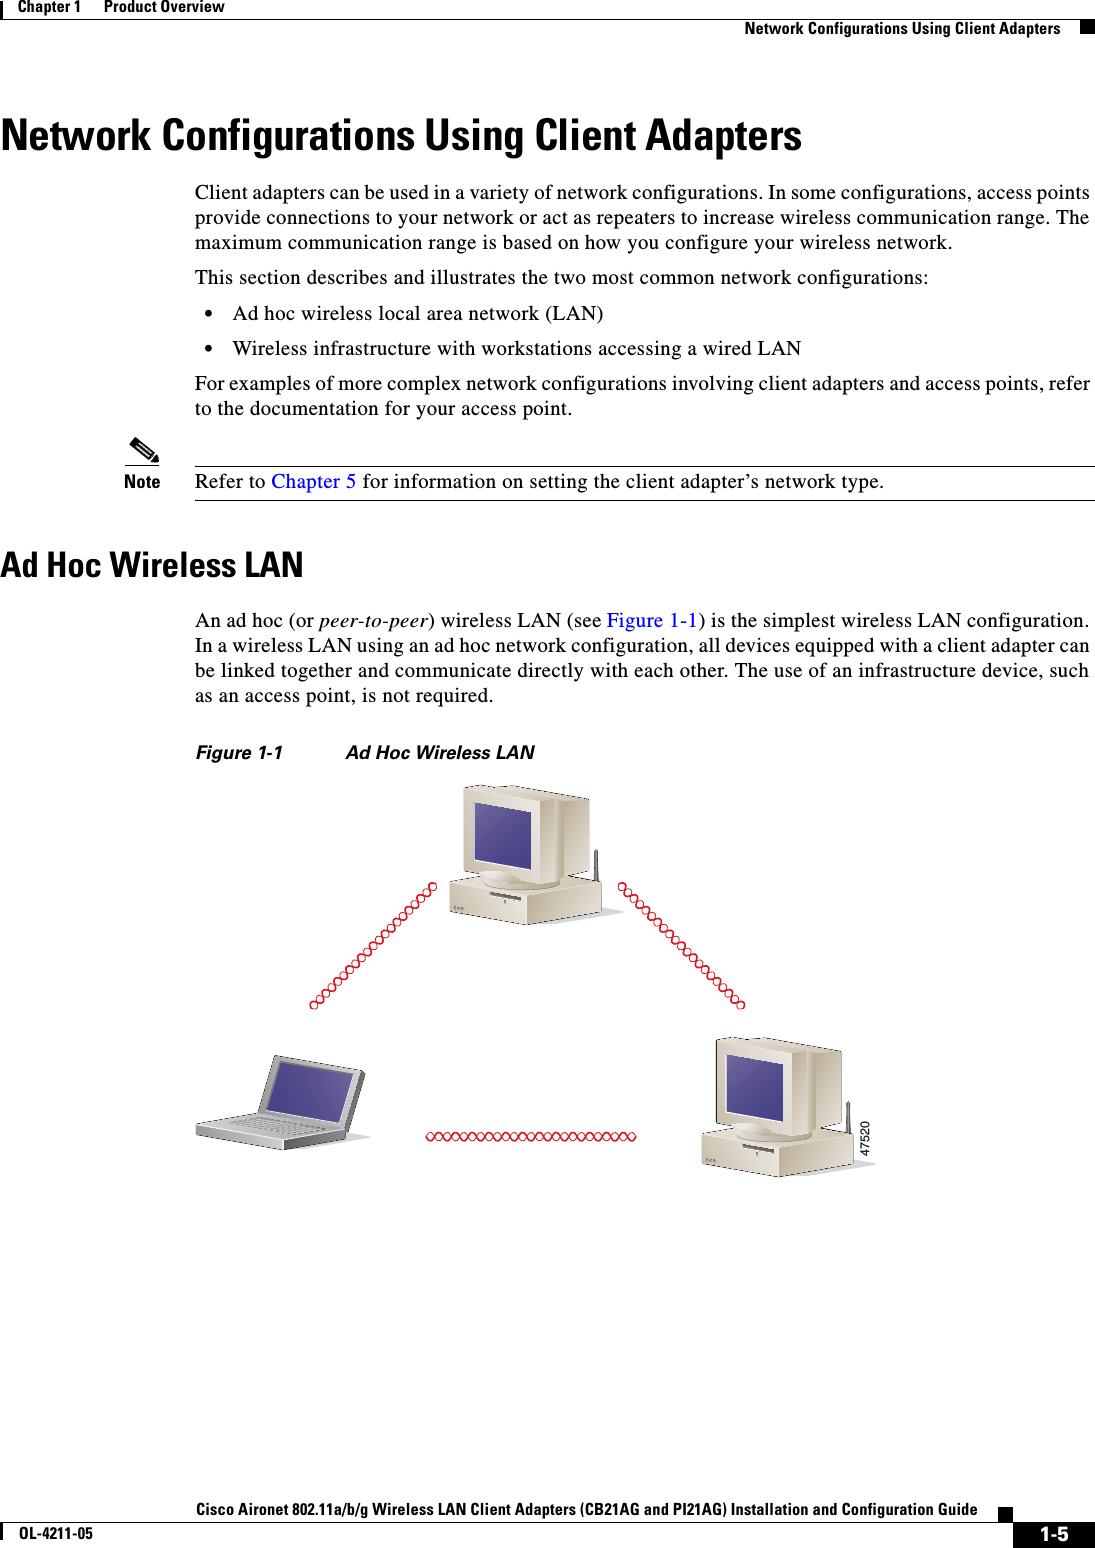 1-5Cisco Aironet 802.11a/b/g Wireless LAN Client Adapters (CB21AG and PI21AG) Installation and Configuration GuideOL-4211-05Chapter 1      Product OverviewNetwork Configurations Using Client AdaptersNetwork Configurations Using Client AdaptersClient adapters can be used in a variety of network configurations. In some configurations, access points provide connections to your network or act as repeaters to increase wireless communication range. The maximum communication range is based on how you configure your wireless network.This section describes and illustrates the two most common network configurations:•Ad hoc wireless local area network (LAN)•Wireless infrastructure with workstations accessing a wired LANFor examples of more complex network configurations involving client adapters and access points, refer to the documentation for your access point.Note Refer to Chapter 5 for information on setting the client adapter’s network type.Ad Hoc Wireless LANAn ad hoc (or peer-to-peer) wireless LAN (see Figure 1-1) is the simplest wireless LAN configuration. In a wireless LAN using an ad hoc network configuration, all devices equipped with a client adapter can be linked together and communicate directly with each other. The use of an infrastructure device, such as an access point, is not required.Figure 1-1 Ad Hoc Wireless LAN47520